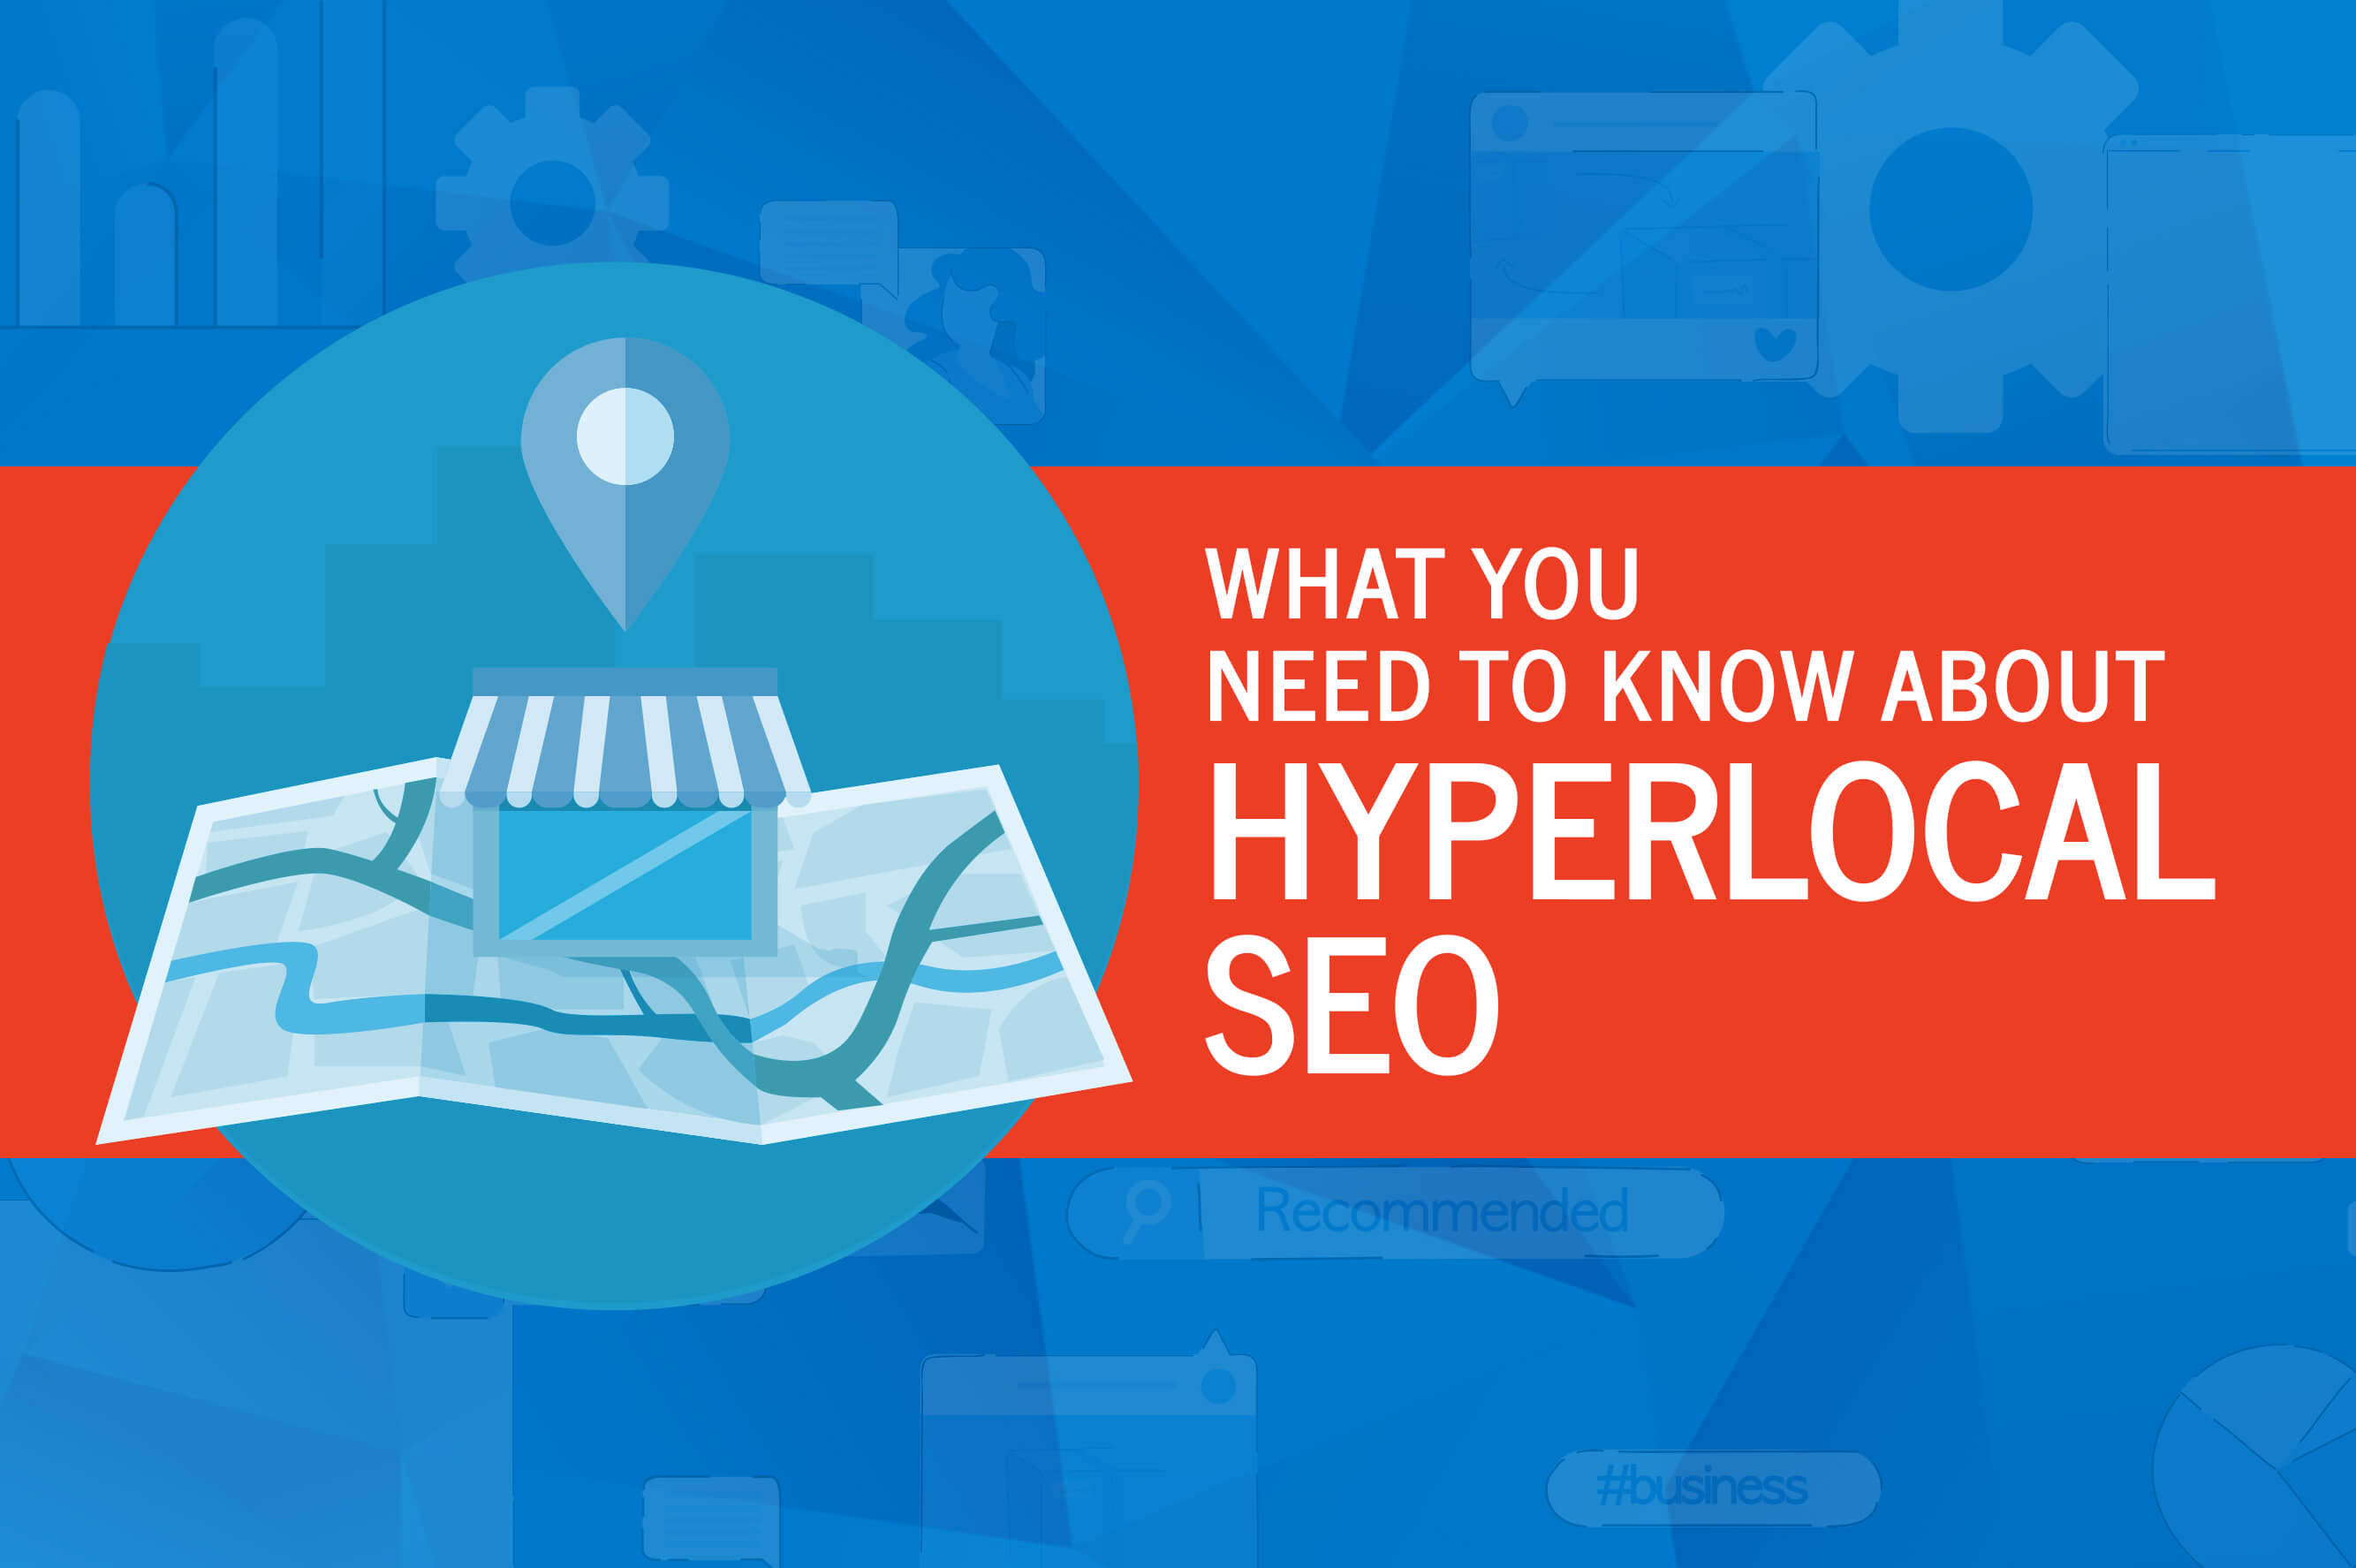 What You Need to Know About Hyperlocal SEO